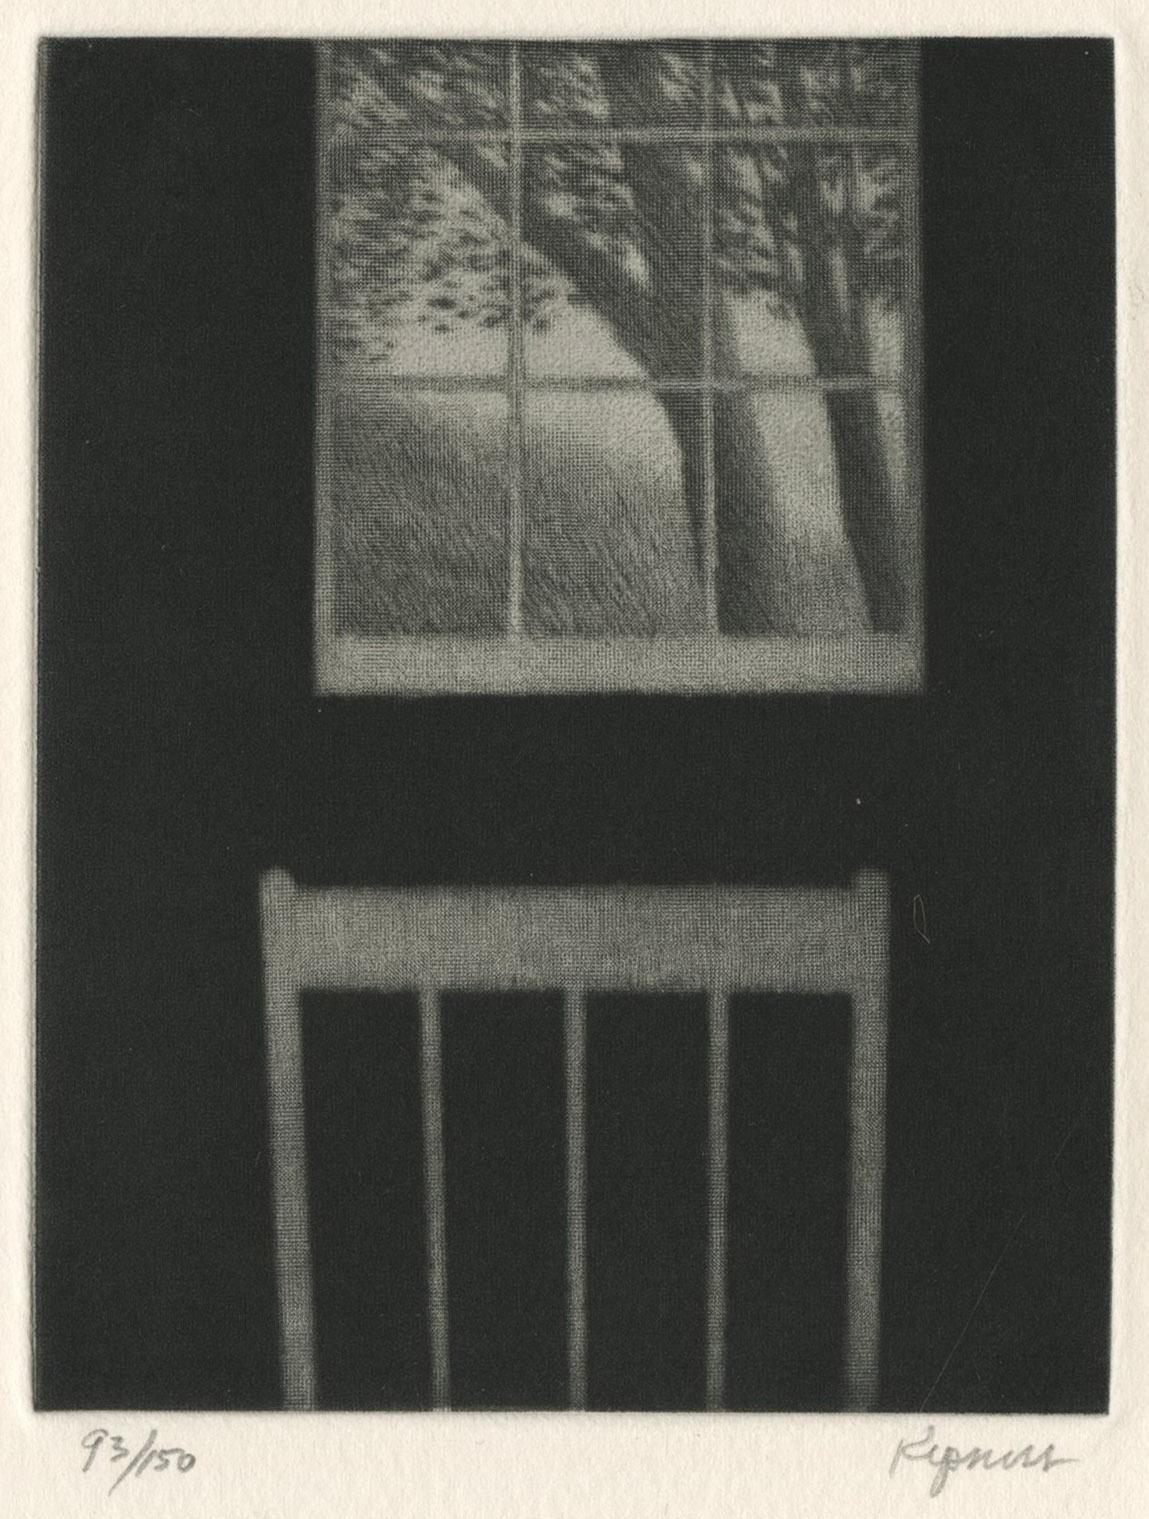 Robert Kipniss Interior Print - Landscape with Window and Chair